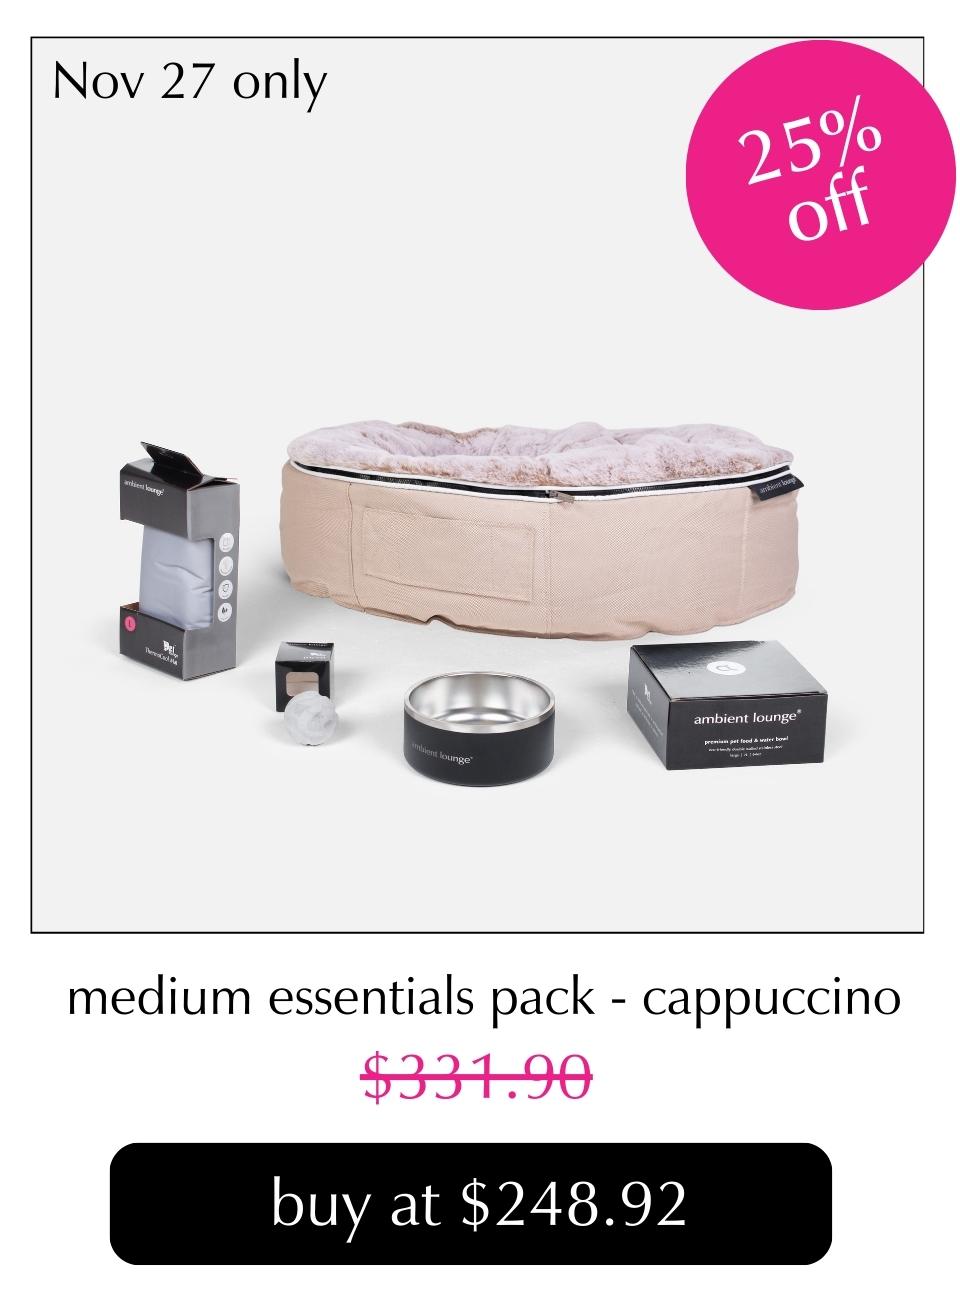 new dog essentials pack cappuccino 30% off